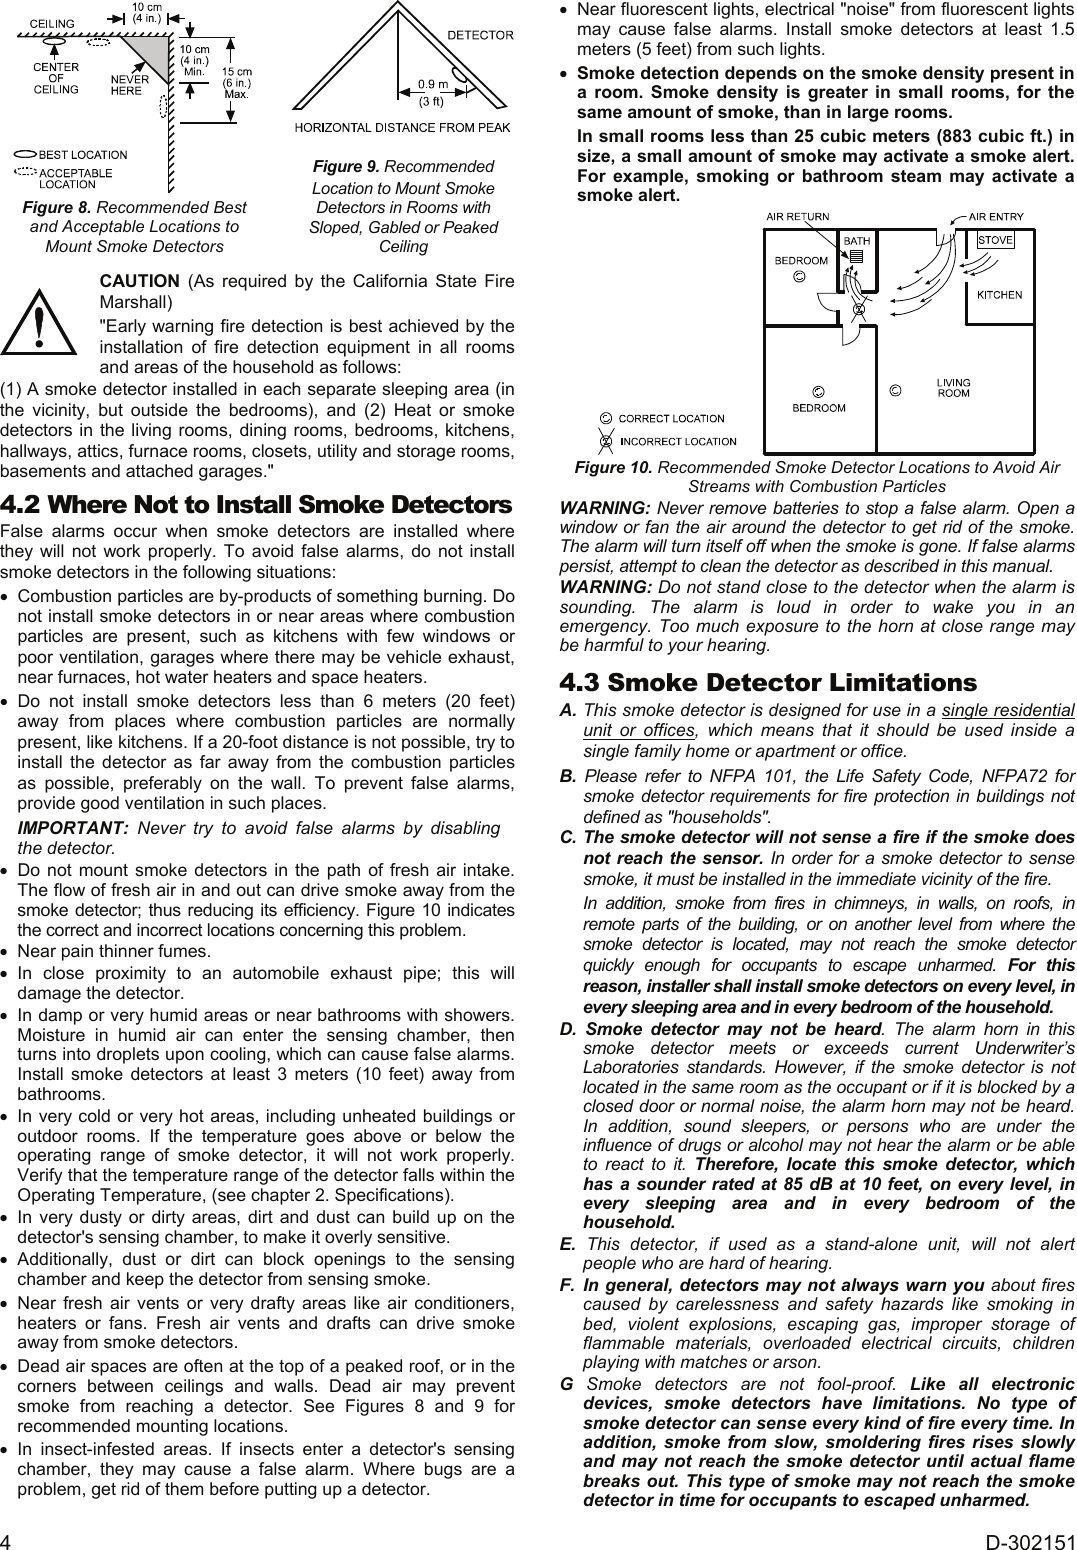 4  D-302151  Figure 8. Recommended Best  and Acceptable Locations to  Mount Smoke Detectors   Figure 9. Recommended  Location to Mount Smoke  Detectors in Rooms with Sloped, Gabled or Peaked Ceiling   CAUTION (As required by the California State Fire Marshall) &quot;Early warning fire detection is best achieved by the installation of fire detection equipment in all rooms and areas of the household as follows: (1) A smoke detector installed in each separate sleeping area (in the vicinity, but outside the bedrooms), and (2) Heat or smoke detectors in the living rooms, dining rooms, bedrooms, kitchens, hallways, attics, furnace rooms, closets, utility and storage rooms, basements and attached garages.&quot; 4.2 Where Not to Install Smoke Detectors  False alarms occur when smoke detectors are installed where they will not work properly. To avoid false alarms, do not install smoke detectors in the following situations: •  Combustion particles are by-products of something burning. Do not install smoke detectors in or near areas where combustion particles are present, such as kitchens with few windows or poor ventilation, garages where there may be vehicle exhaust, near furnaces, hot water heaters and space heaters. • Do not install smoke detectors less than 6 meters (20 feet) away from places where combustion particles are normally present, like kitchens. If a 20-foot distance is not possible, try to install the detector as far away from the combustion particles as possible, preferably on the wall. To prevent false alarms, provide good ventilation in such places. IMPORTANT: Never try to avoid false alarms by disabling the detector. •  Do not mount smoke detectors in the path of fresh air intake. The flow of fresh air in and out can drive smoke away from the smoke detector; thus reducing its efficiency. Figure 10 indicates the correct and incorrect locations concerning this problem. •  Near pain thinner fumes. • In close proximity to an automobile exhaust pipe; this will damage the detector. •  In damp or very humid areas or near bathrooms with showers. Moisture in humid air can enter the sensing chamber, then turns into droplets upon cooling, which can cause false alarms. Install smoke detectors at least 3 meters (10 feet) away from bathrooms. •  In very cold or very hot areas, including unheated buildings or outdoor rooms. If the temperature goes above or below the operating range of smoke detector, it will not work properly. Verify that the temperature range of the detector falls within the Operating Temperature, (see chapter 2. Specifications). •  In very dusty or dirty areas, dirt and dust can build up on the detector&apos;s sensing chamber, to make it overly sensitive.  • Additionally, dust or dirt can block openings to the sensing chamber and keep the detector from sensing smoke. • Near fresh air vents or very drafty areas like air conditioners, heaters or fans. Fresh air vents and drafts can drive smoke away from smoke detectors. •  Dead air spaces are often at the top of a peaked roof, or in the corners between ceilings and walls. Dead air may prevent smoke from reaching a detector. See Figures 8 and 9 for recommended mounting locations. • In insect-infested areas. If insects enter a detector&apos;s sensing chamber, they may cause a false alarm. Where bugs are a problem, get rid of them before putting up a detector. •  Near fluorescent lights, electrical &quot;noise&quot; from fluorescent lights may cause false alarms. Install smoke detectors at least 1.5 meters (5 feet) from such lights. • Smoke detection depends on the smoke density present in a room. Smoke density is greater in small rooms, for the same amount of smoke, than in large rooms. In small rooms less than 25 cubic meters (883 cubic ft.) in size, a small amount of smoke may activate a smoke alert. For example, smoking or bathroom steam may activate a smoke alert.  Figure 10. Recommended Smoke Detector Locations to Avoid Air Streams with Combustion Particles WARNING: Never remove batteries to stop a false alarm. Open a window or fan the air around the detector to get rid of the smoke. The alarm will turn itself off when the smoke is gone. If false alarms persist, attempt to clean the detector as described in this manual.  WARNING: Do not stand close to the detector when the alarm is sounding. The alarm is loud in order to wake you in an emergency. Too much exposure to the horn at close range may be harmful to your hearing. 4.3 Smoke Detector Limitations A. This smoke detector is designed for use in a single residential unit or offices, which means that it should be used inside a single family home or apartment or office. B. Please refer to NFPA 101, the Life Safety Code, NFPA72 for smoke detector requirements for fire protection in buildings not defined as &quot;households&quot;. C. The smoke detector will not sense a fire if the smoke does not reach the sensor. In order for a smoke detector to sense smoke, it must be installed in the immediate vicinity of the fire.  In addition, smoke from fires in chimneys, in walls, on roofs, in remote parts of the building, or on another level from where the smoke detector is located, may not reach the smoke detector quickly enough for occupants to escape unharmed. For this reason, installer shall install smoke detectors on every level, in every sleeping area and in every bedroom of the household. D. Smoke detector may not be heard. The alarm horn in this smoke detector meets or exceeds current Underwriter’s Laboratories standards. However, if the smoke detector is not located in the same room as the occupant or if it is blocked by a closed door or normal noise, the alarm horn may not be heard. In addition, sound sleepers, or persons who are under the influence of drugs or alcohol may not hear the alarm or be able to react to it. Therefore, locate this smoke detector, which has a sounder rated at 85 dB at 10 feet, on every level, in every sleeping area and in every bedroom of the household. E. This detector, if used as a stand-alone unit, will not alert people who are hard of hearing. F.  In general, detectors may not always warn you about fires caused by carelessness and safety hazards like smoking in bed, violent explosions, escaping gas, improper storage of flammable materials, overloaded electrical circuits, children playing with matches or arson. G Smoke detectors are not fool-proof. Like all electronic devices, smoke detectors have limitations. No type of smoke detector can sense every kind of fire every time. In addition, smoke from slow, smoldering fires rises slowly and may not reach the smoke detector until actual flame breaks out. This type of smoke may not reach the smoke detector in time for occupants to escaped unharmed. 